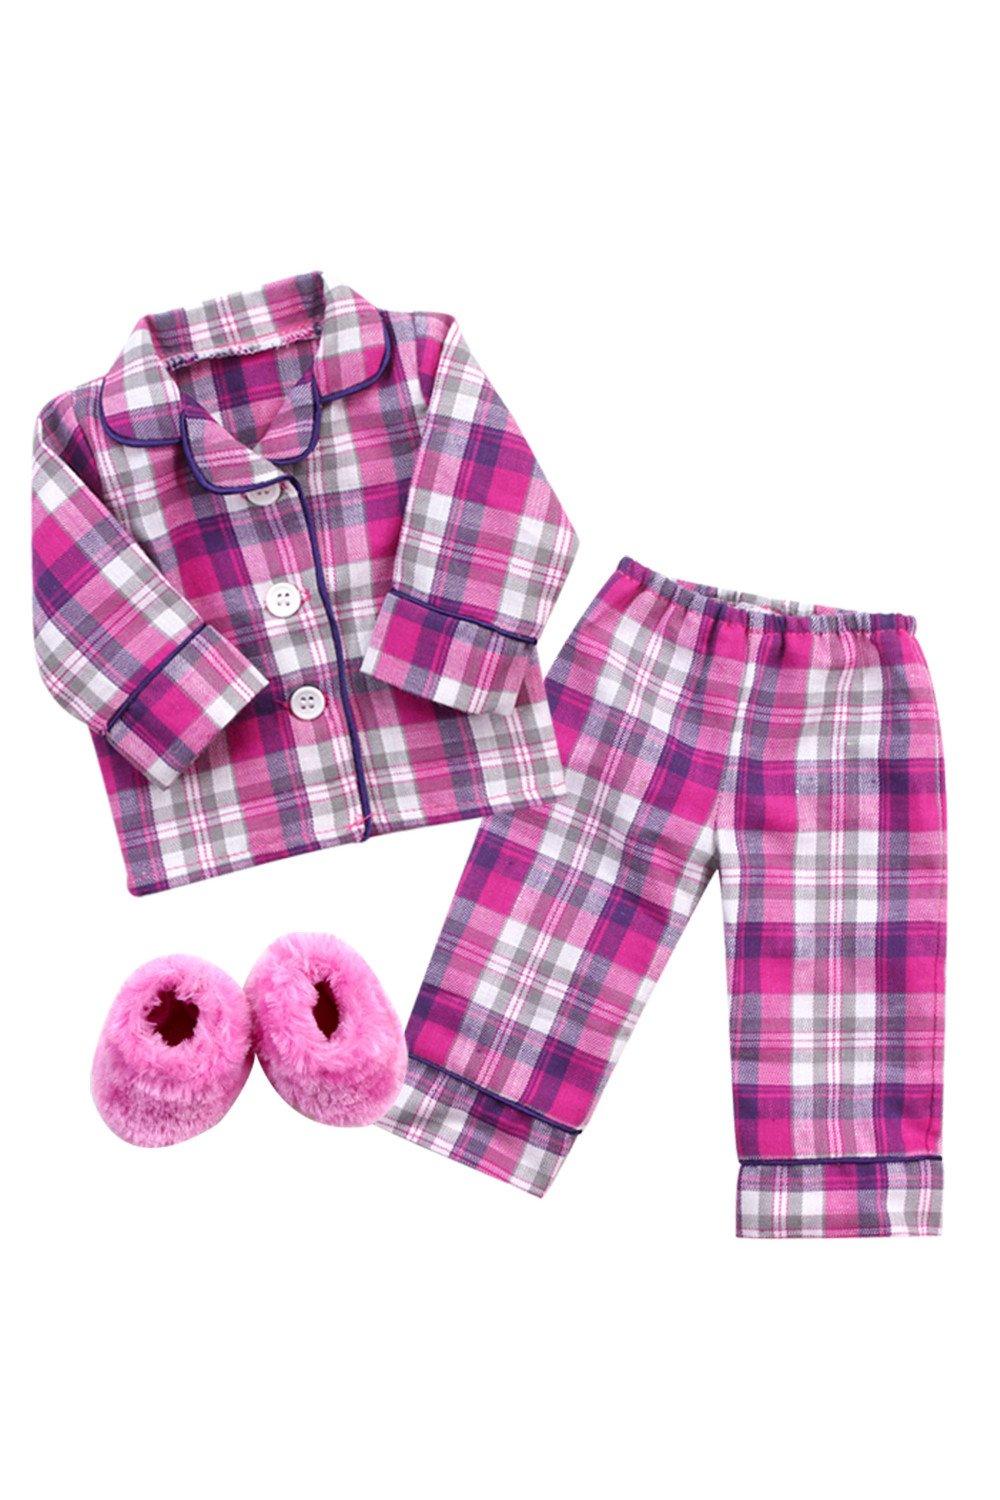 Sophia’s  3 Piece 18" Doll Pink Pijama Outfit with Slippers Set